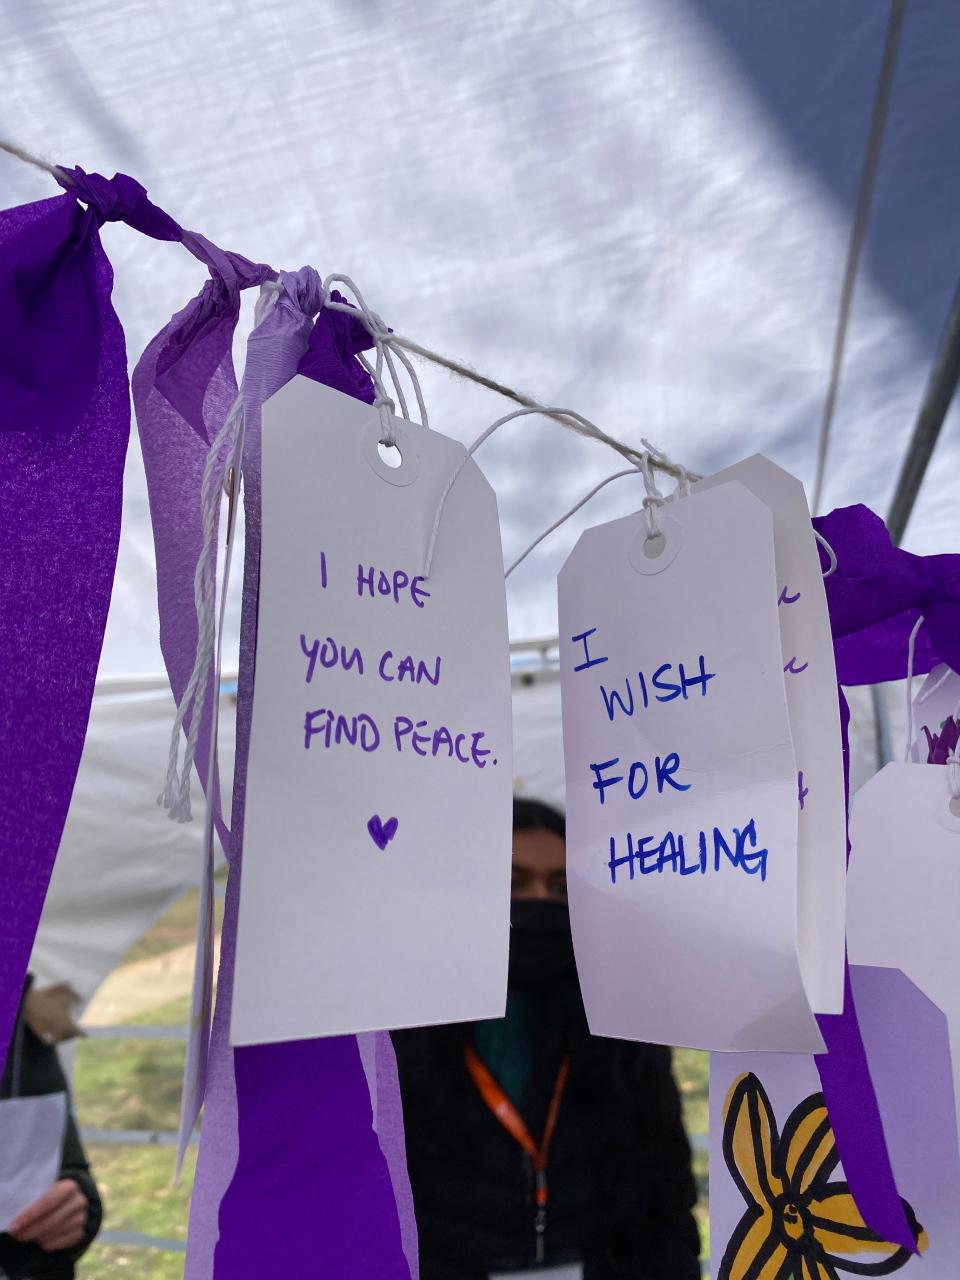 The event held by the Asian Americans Advancing Justice-Atlanta and Asian American Advocacy Fund remembered the victims of the Atlanta spa shootings. Those in attendance were asked to place one wish they had for the year.  Many asked for peace.